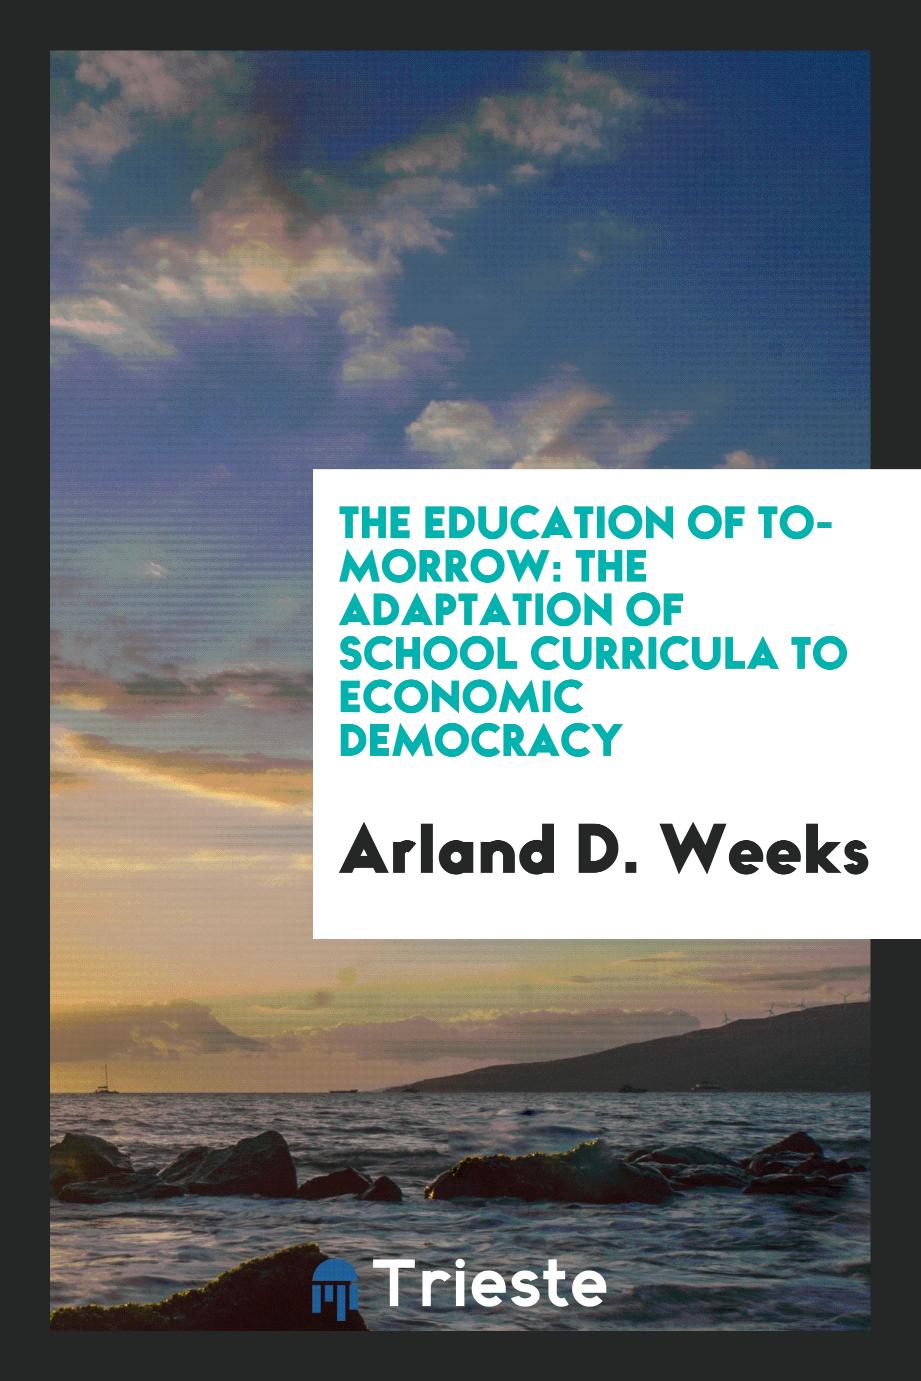 Arland D. Weeks - The Education of To-Morrow: The Adaptation of School Curricula to Economic Democracy